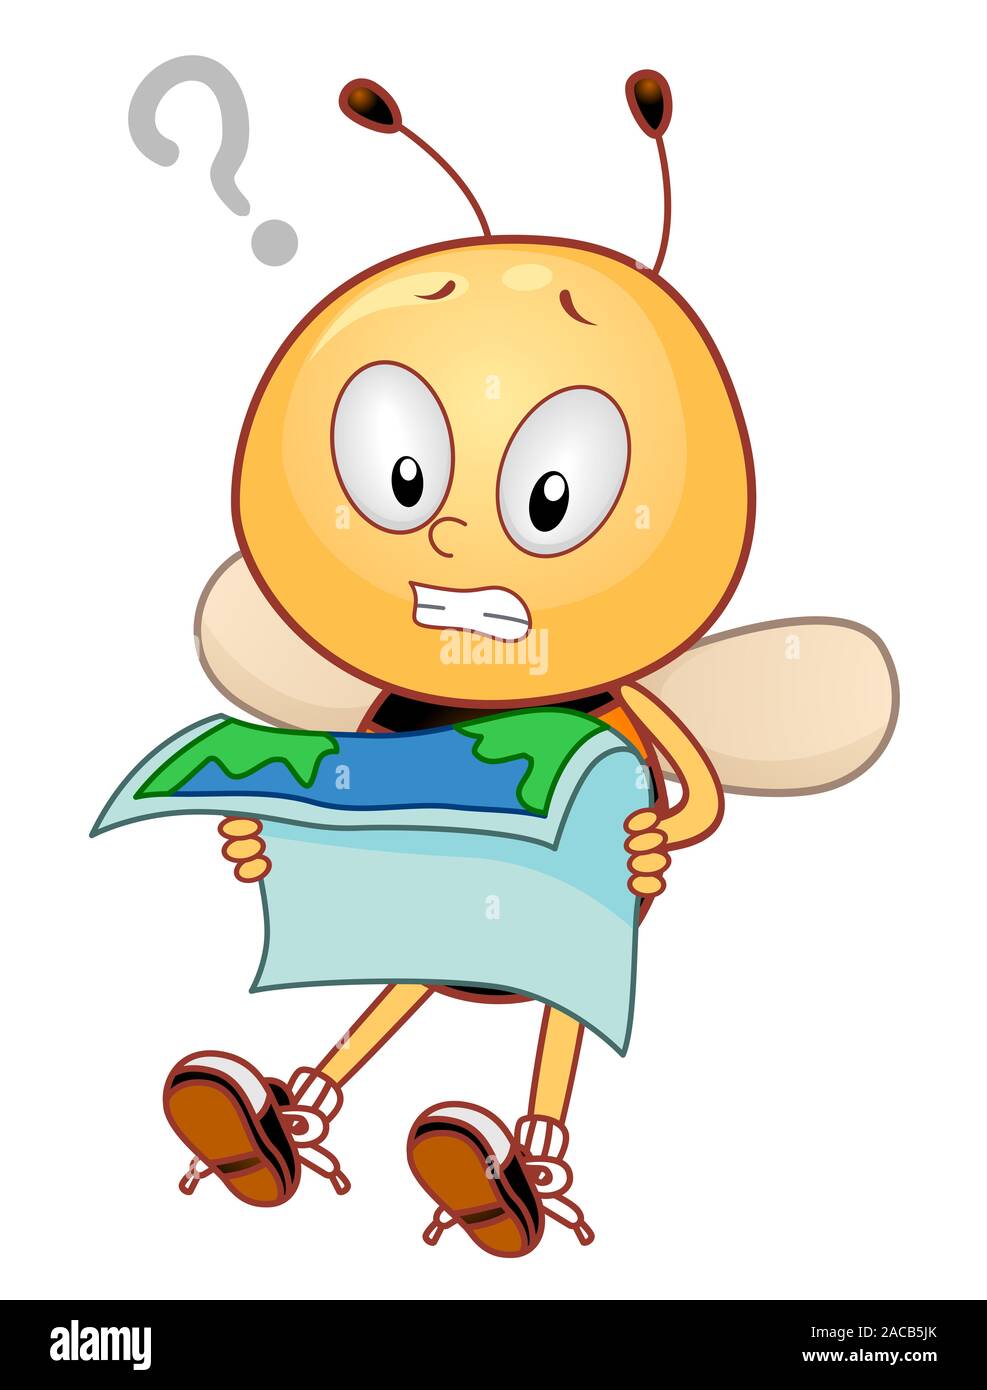 Illustration of a Bee Mascot Holding a Map and Looking Lost Stock Photo